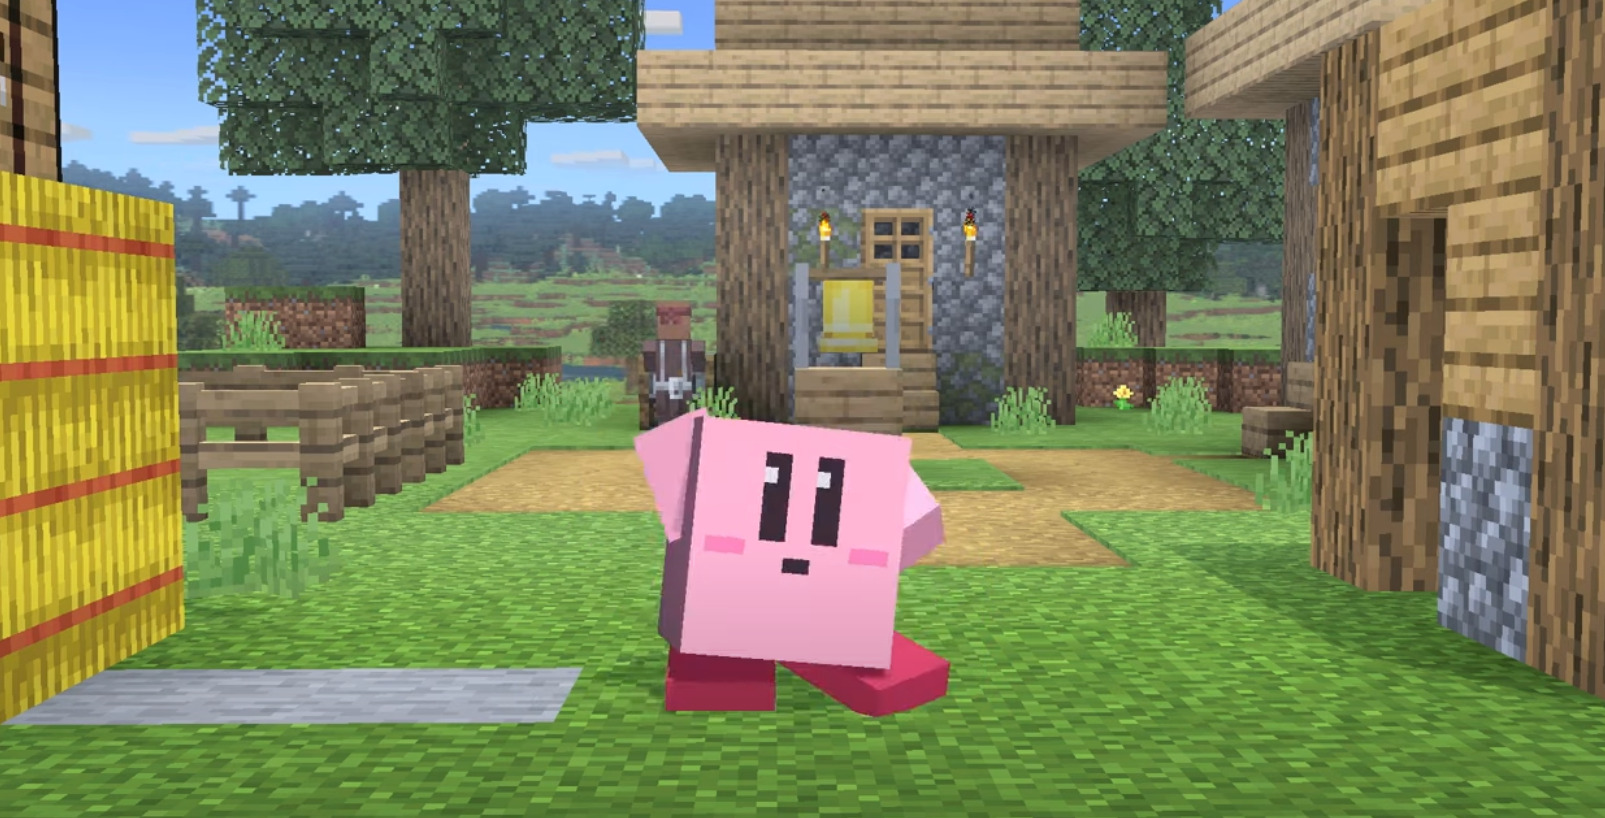 Kirby Will Turn Into A Block If He Inhales Steve Or Alex From Minecraft In Super Smash Bros. Ultimate DLC